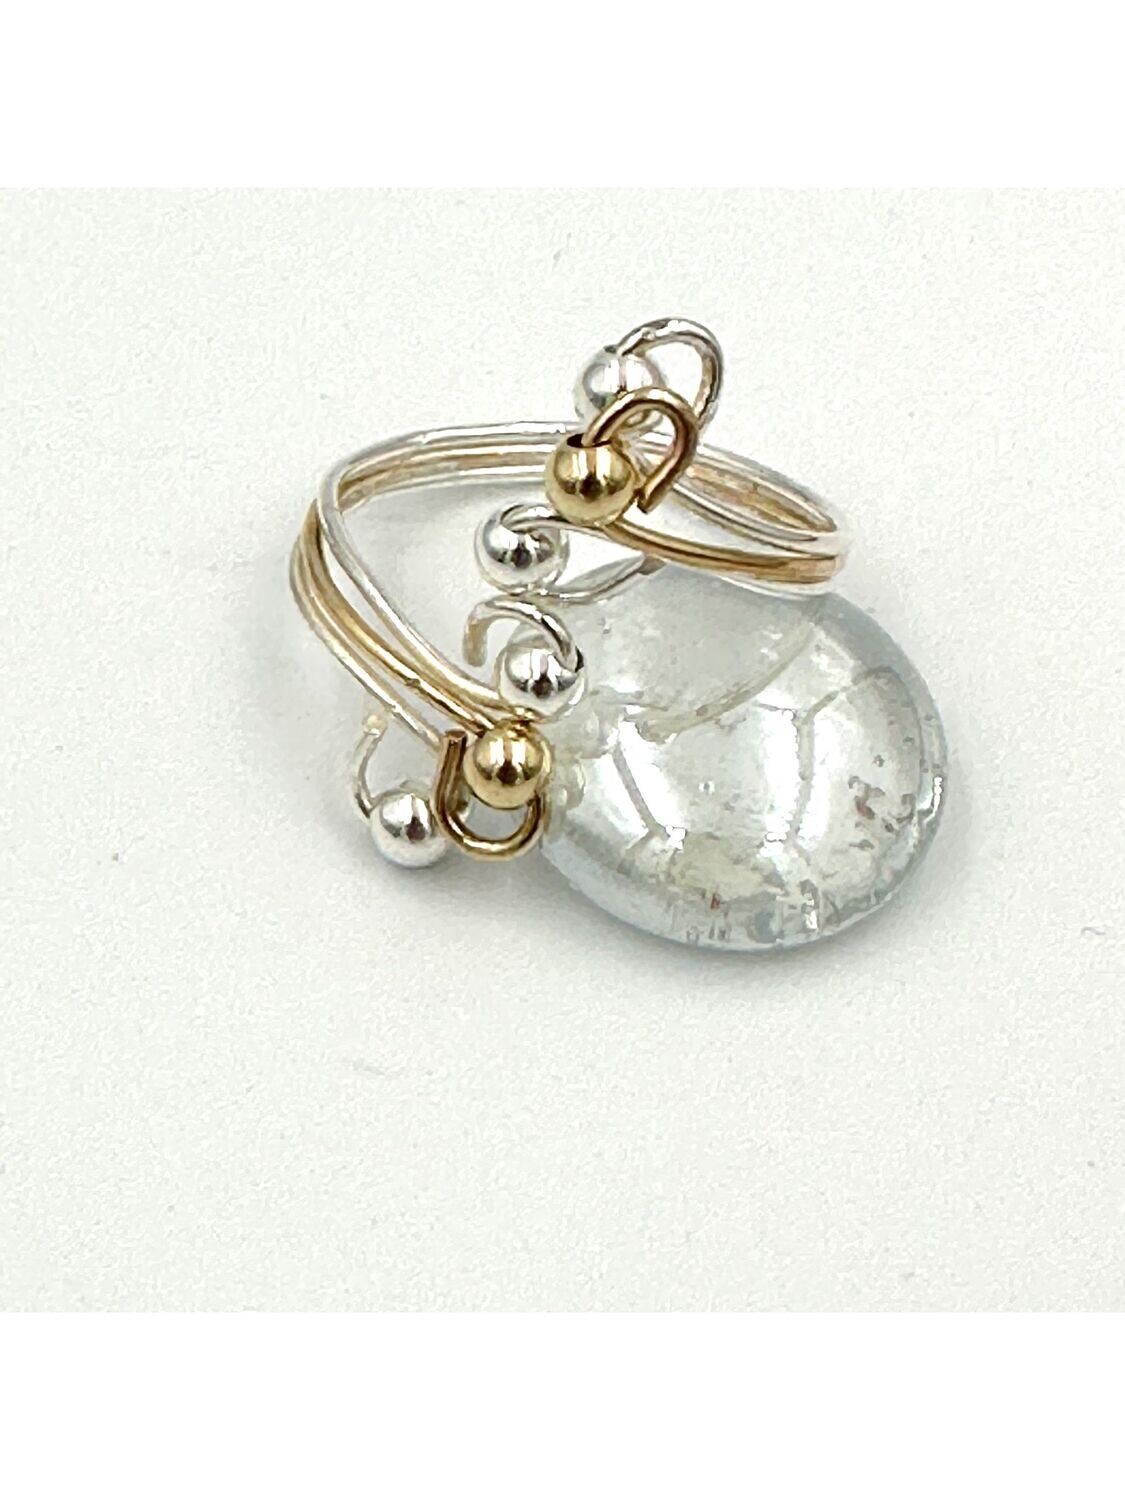 Silver and Gold filled 3 wire curl ring